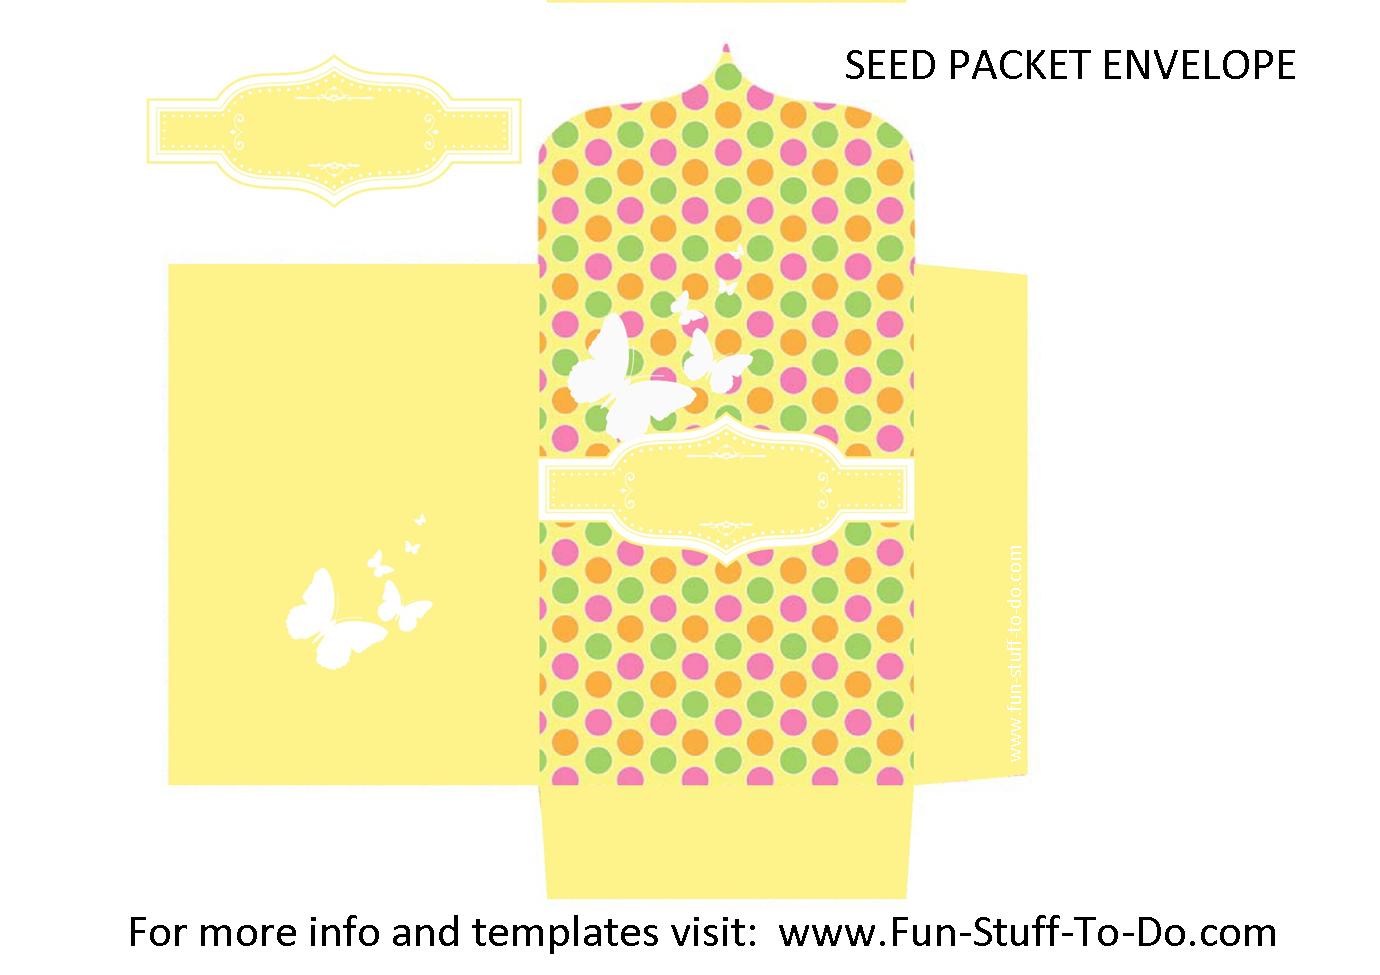 seed packet envelope made with transparent overlay template from Fun-stuff-to-do.com